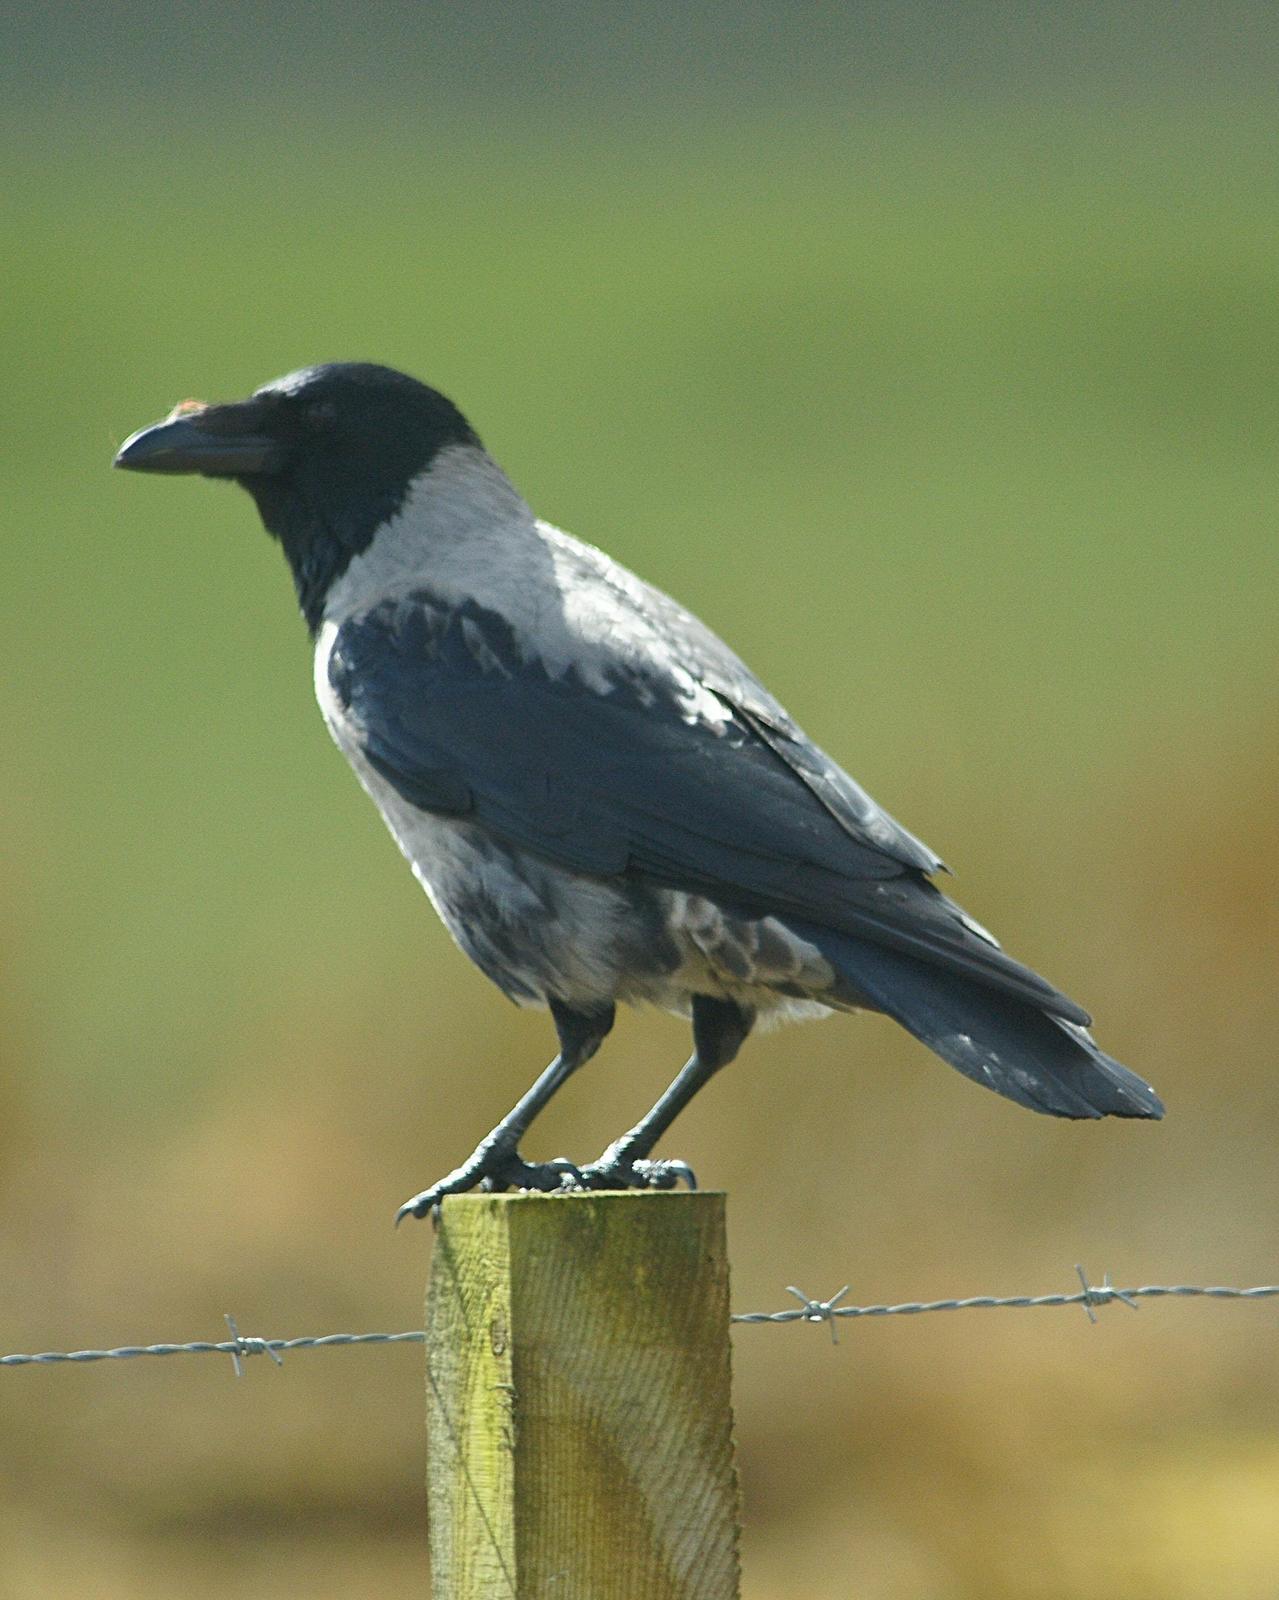 Hooded Crow Photo by Steve Percival